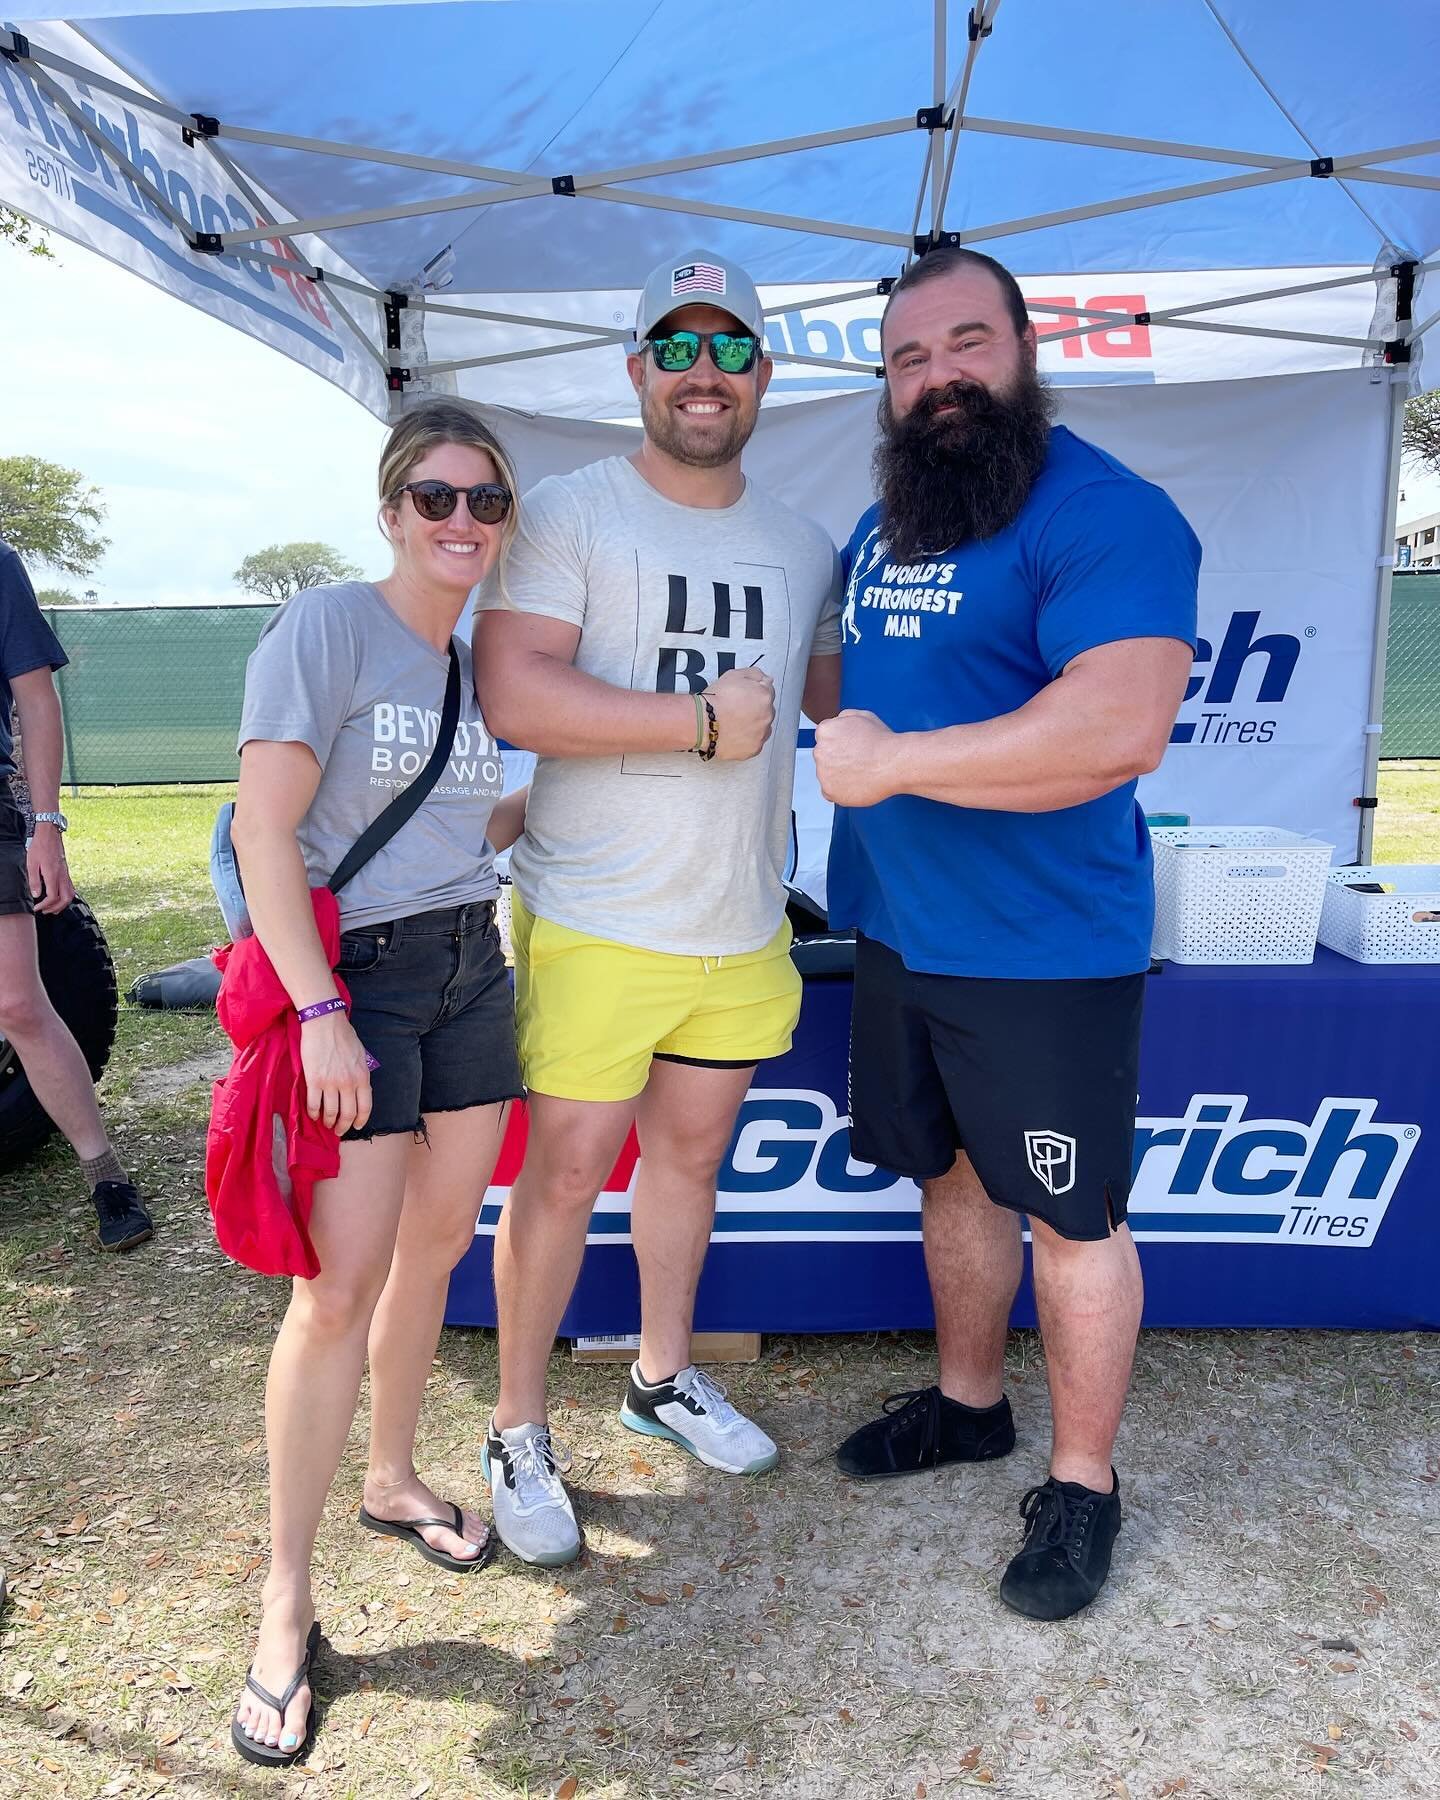 So much fun this year at @theworldsstrongestman !!
We got to meet @bobby_thompson_prostrongman and see @mitchellhooper in action! These men are 💪🏽😳
@bfullerton5